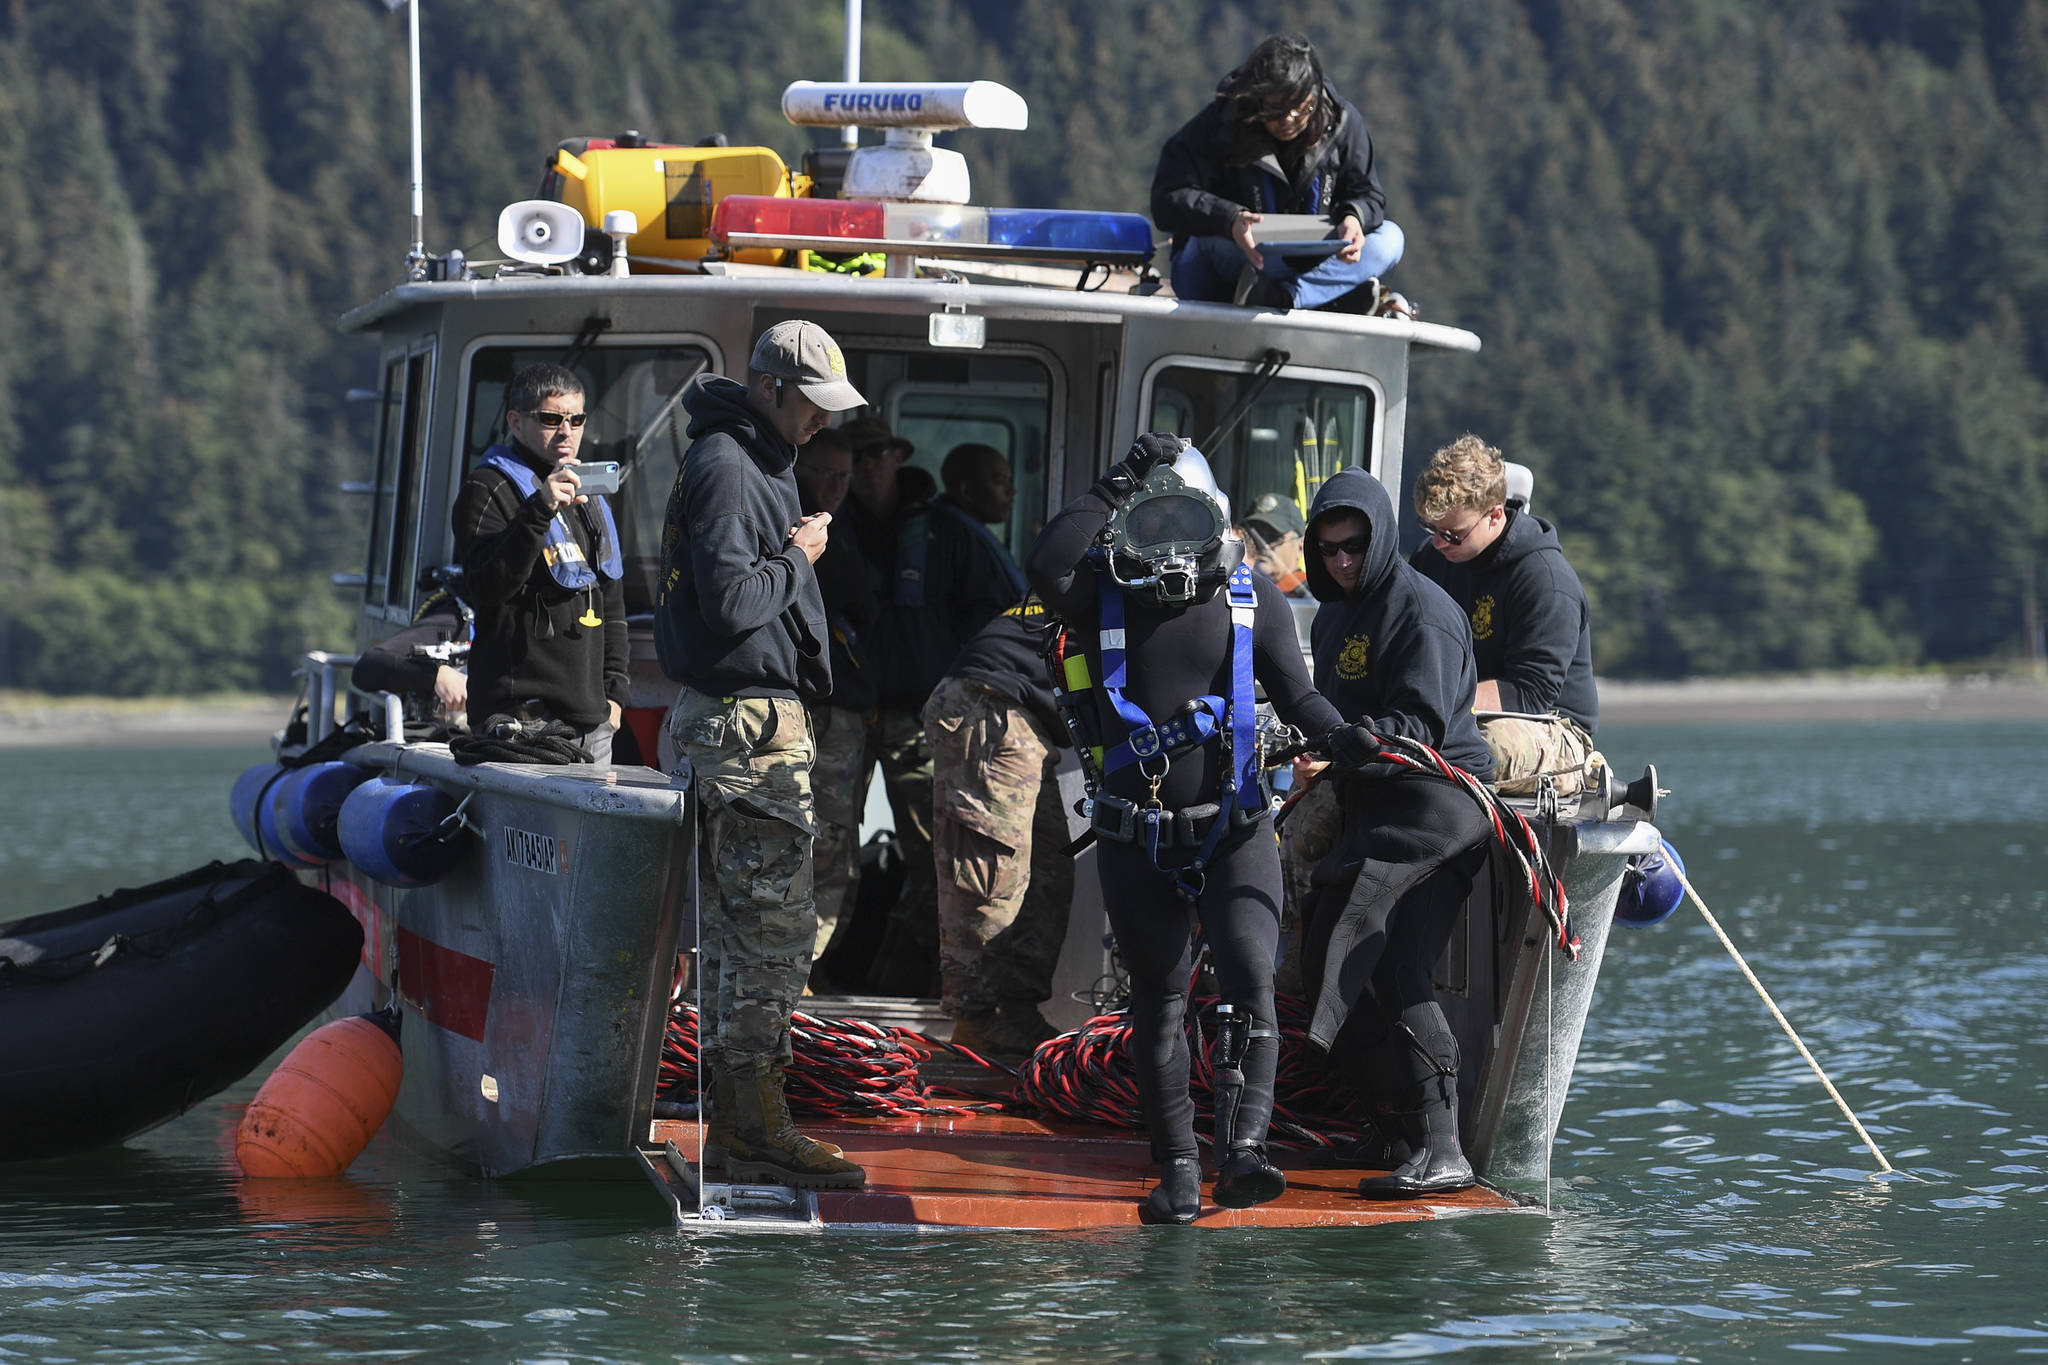 Spc. James Lewis, center, steps off the bow of a Juneau Harbormaster’s boat as members of the Army’s 74th Engineer Dive Detachment work to retrieve lost crab pots in Gastineau Channel for the Douglas Indian Association/NOAA Marine Debris Project on Thursday, Sept. 5, 2019. The project aims to identify and remove derelict crab pots and their continued negative impact on wildlife and the environment. (Michael Penn | Juneau Empire)